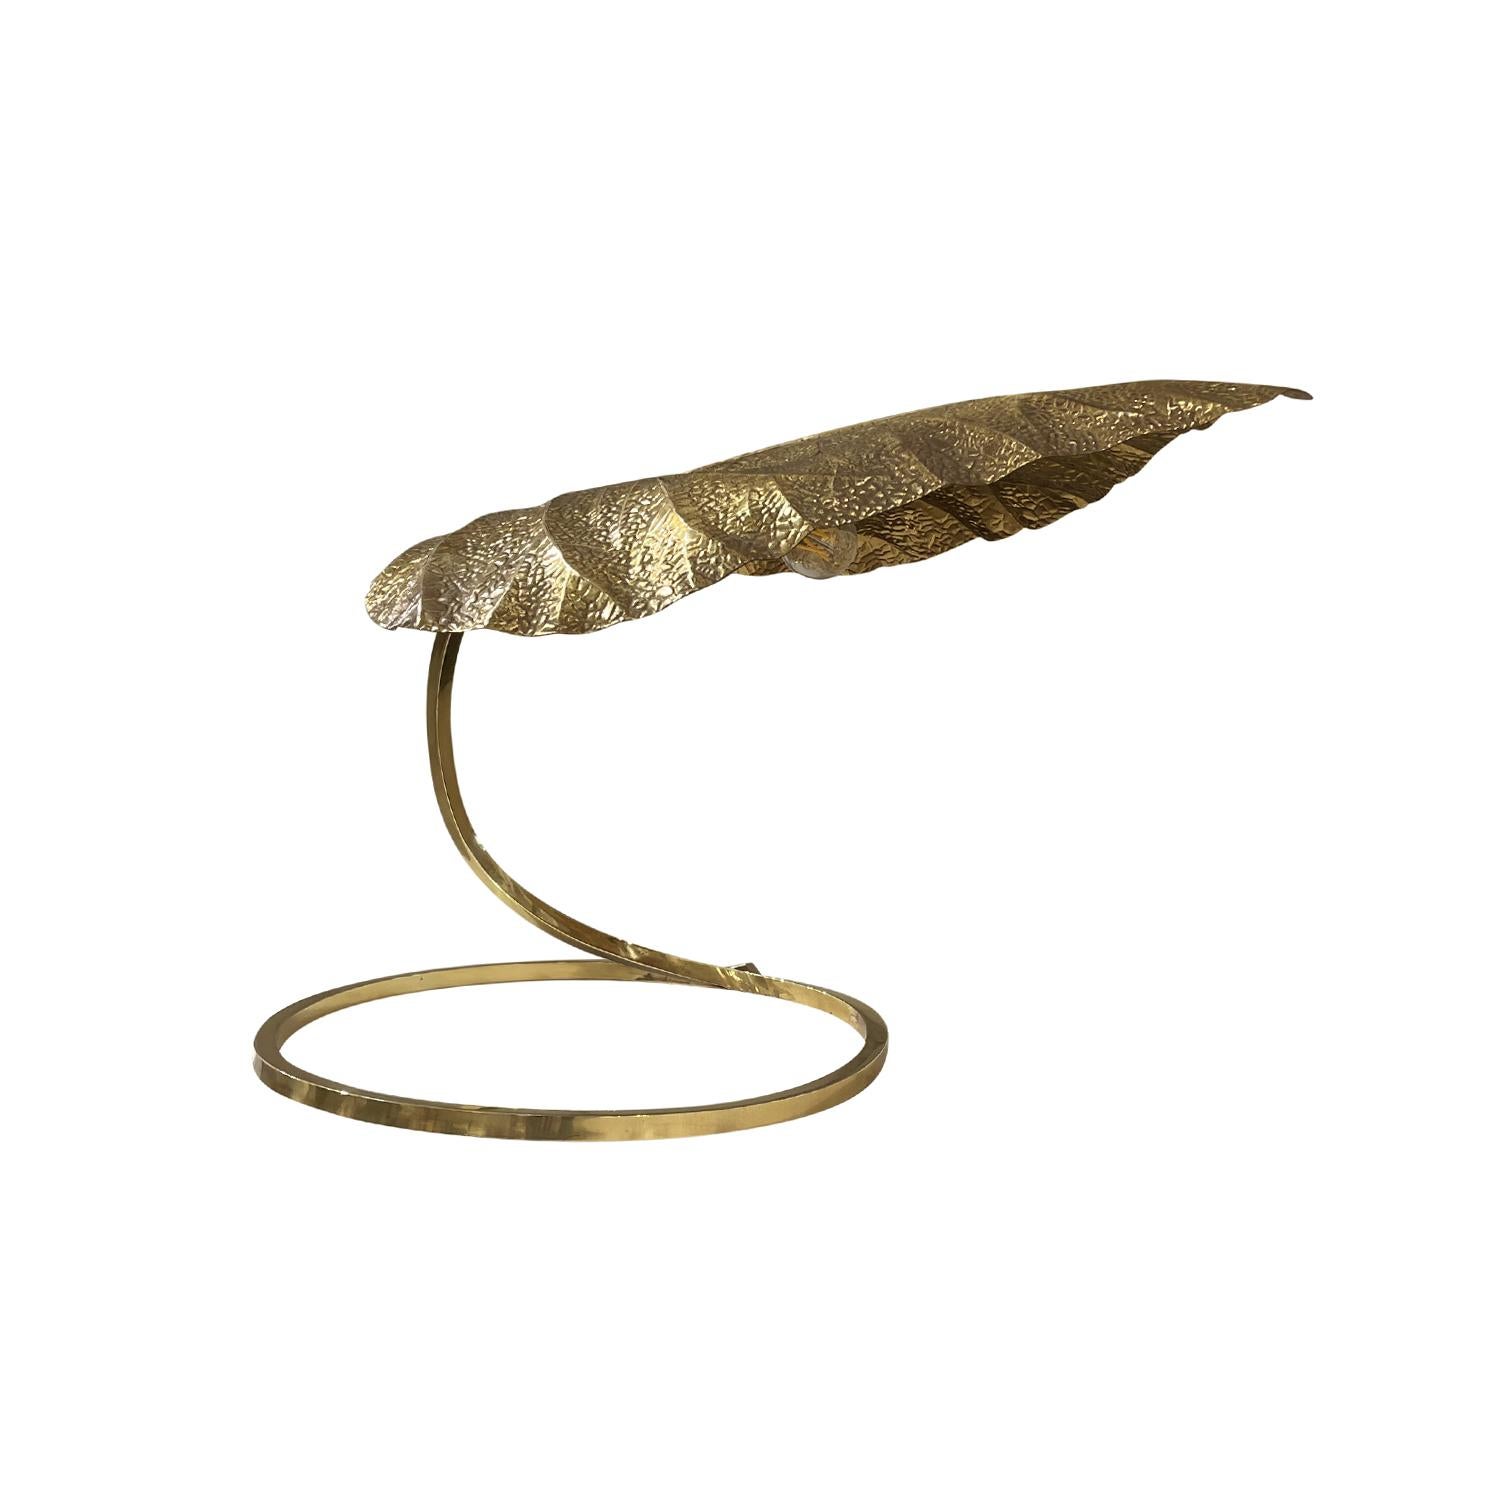 A gold, vintage Mid-Century Modern Italian Rhubarb table light made of handcrafted polished brass designed by Tommaso Barbi and Carlo Giorgi, in good condition. The sculptural lamp is composed with a large leaf which is halted by a curved arm,